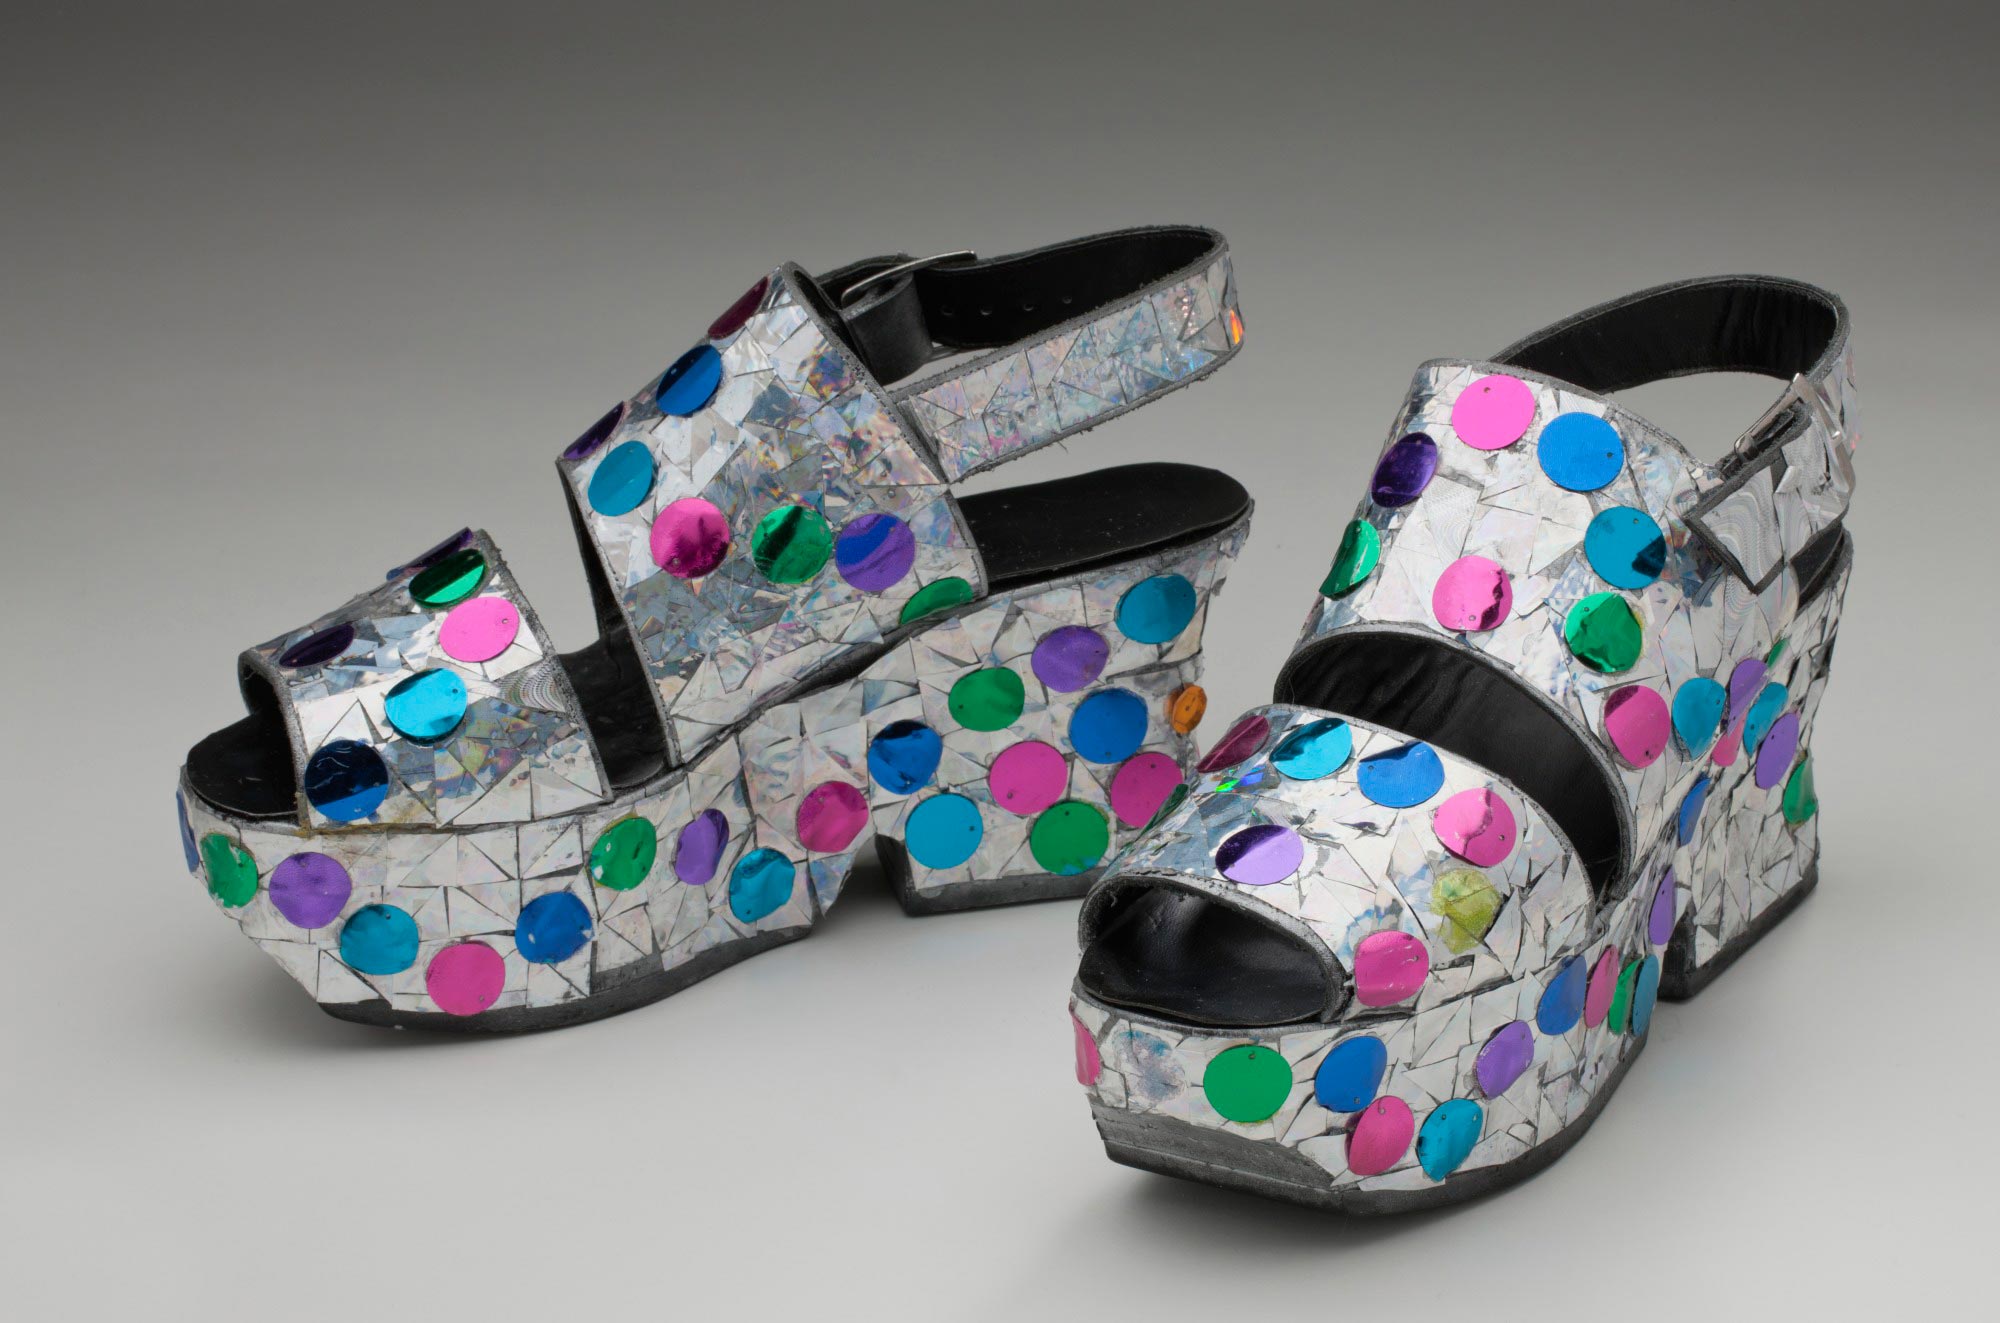 Pair of buckled sling back platform shoes with peek-a-boo toes.